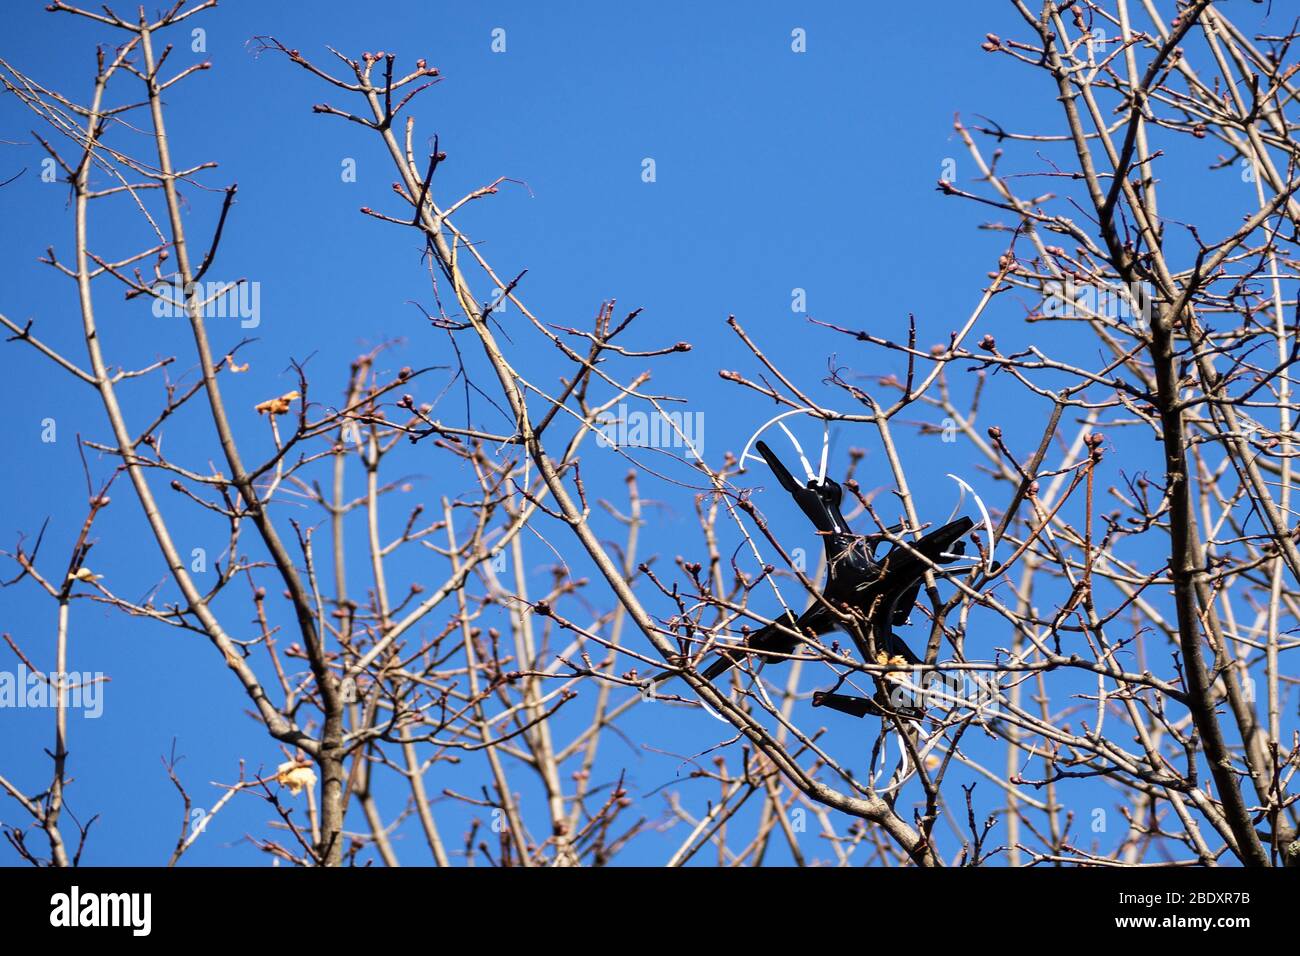 Quadcopter entangled in tree branches Stock Photo